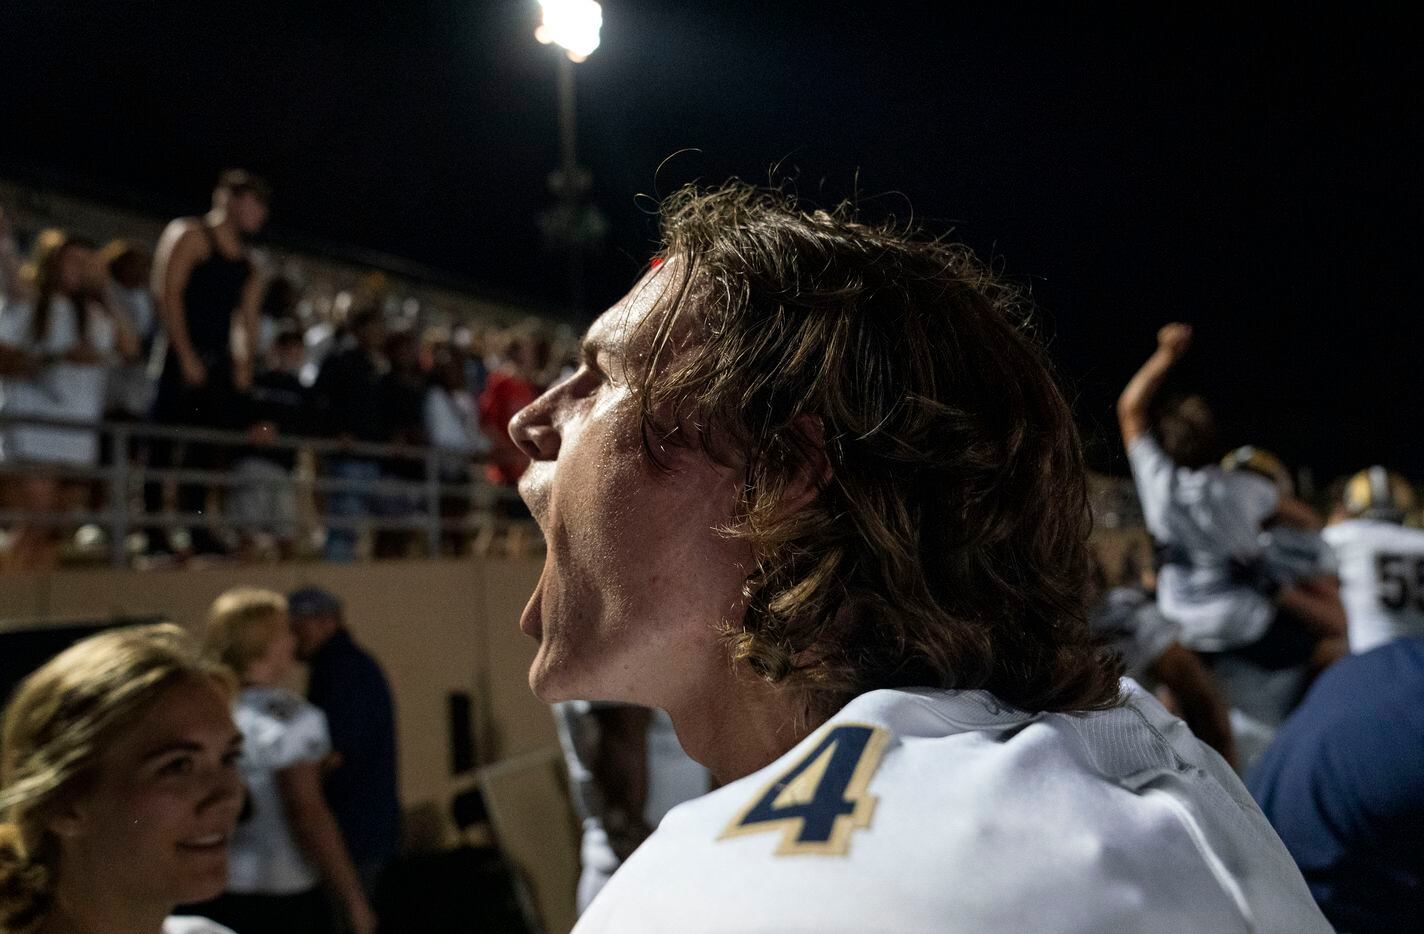 Little Elm senior quarterback John Mateer (4) celebrates with fans after his team’s 35-31 win over Plano West in a high school football game on Friday, Sept. 10, 2021 at John Clark Stadium in Plano, Texas.  (Jeffrey McWhorter/Special Contributor)